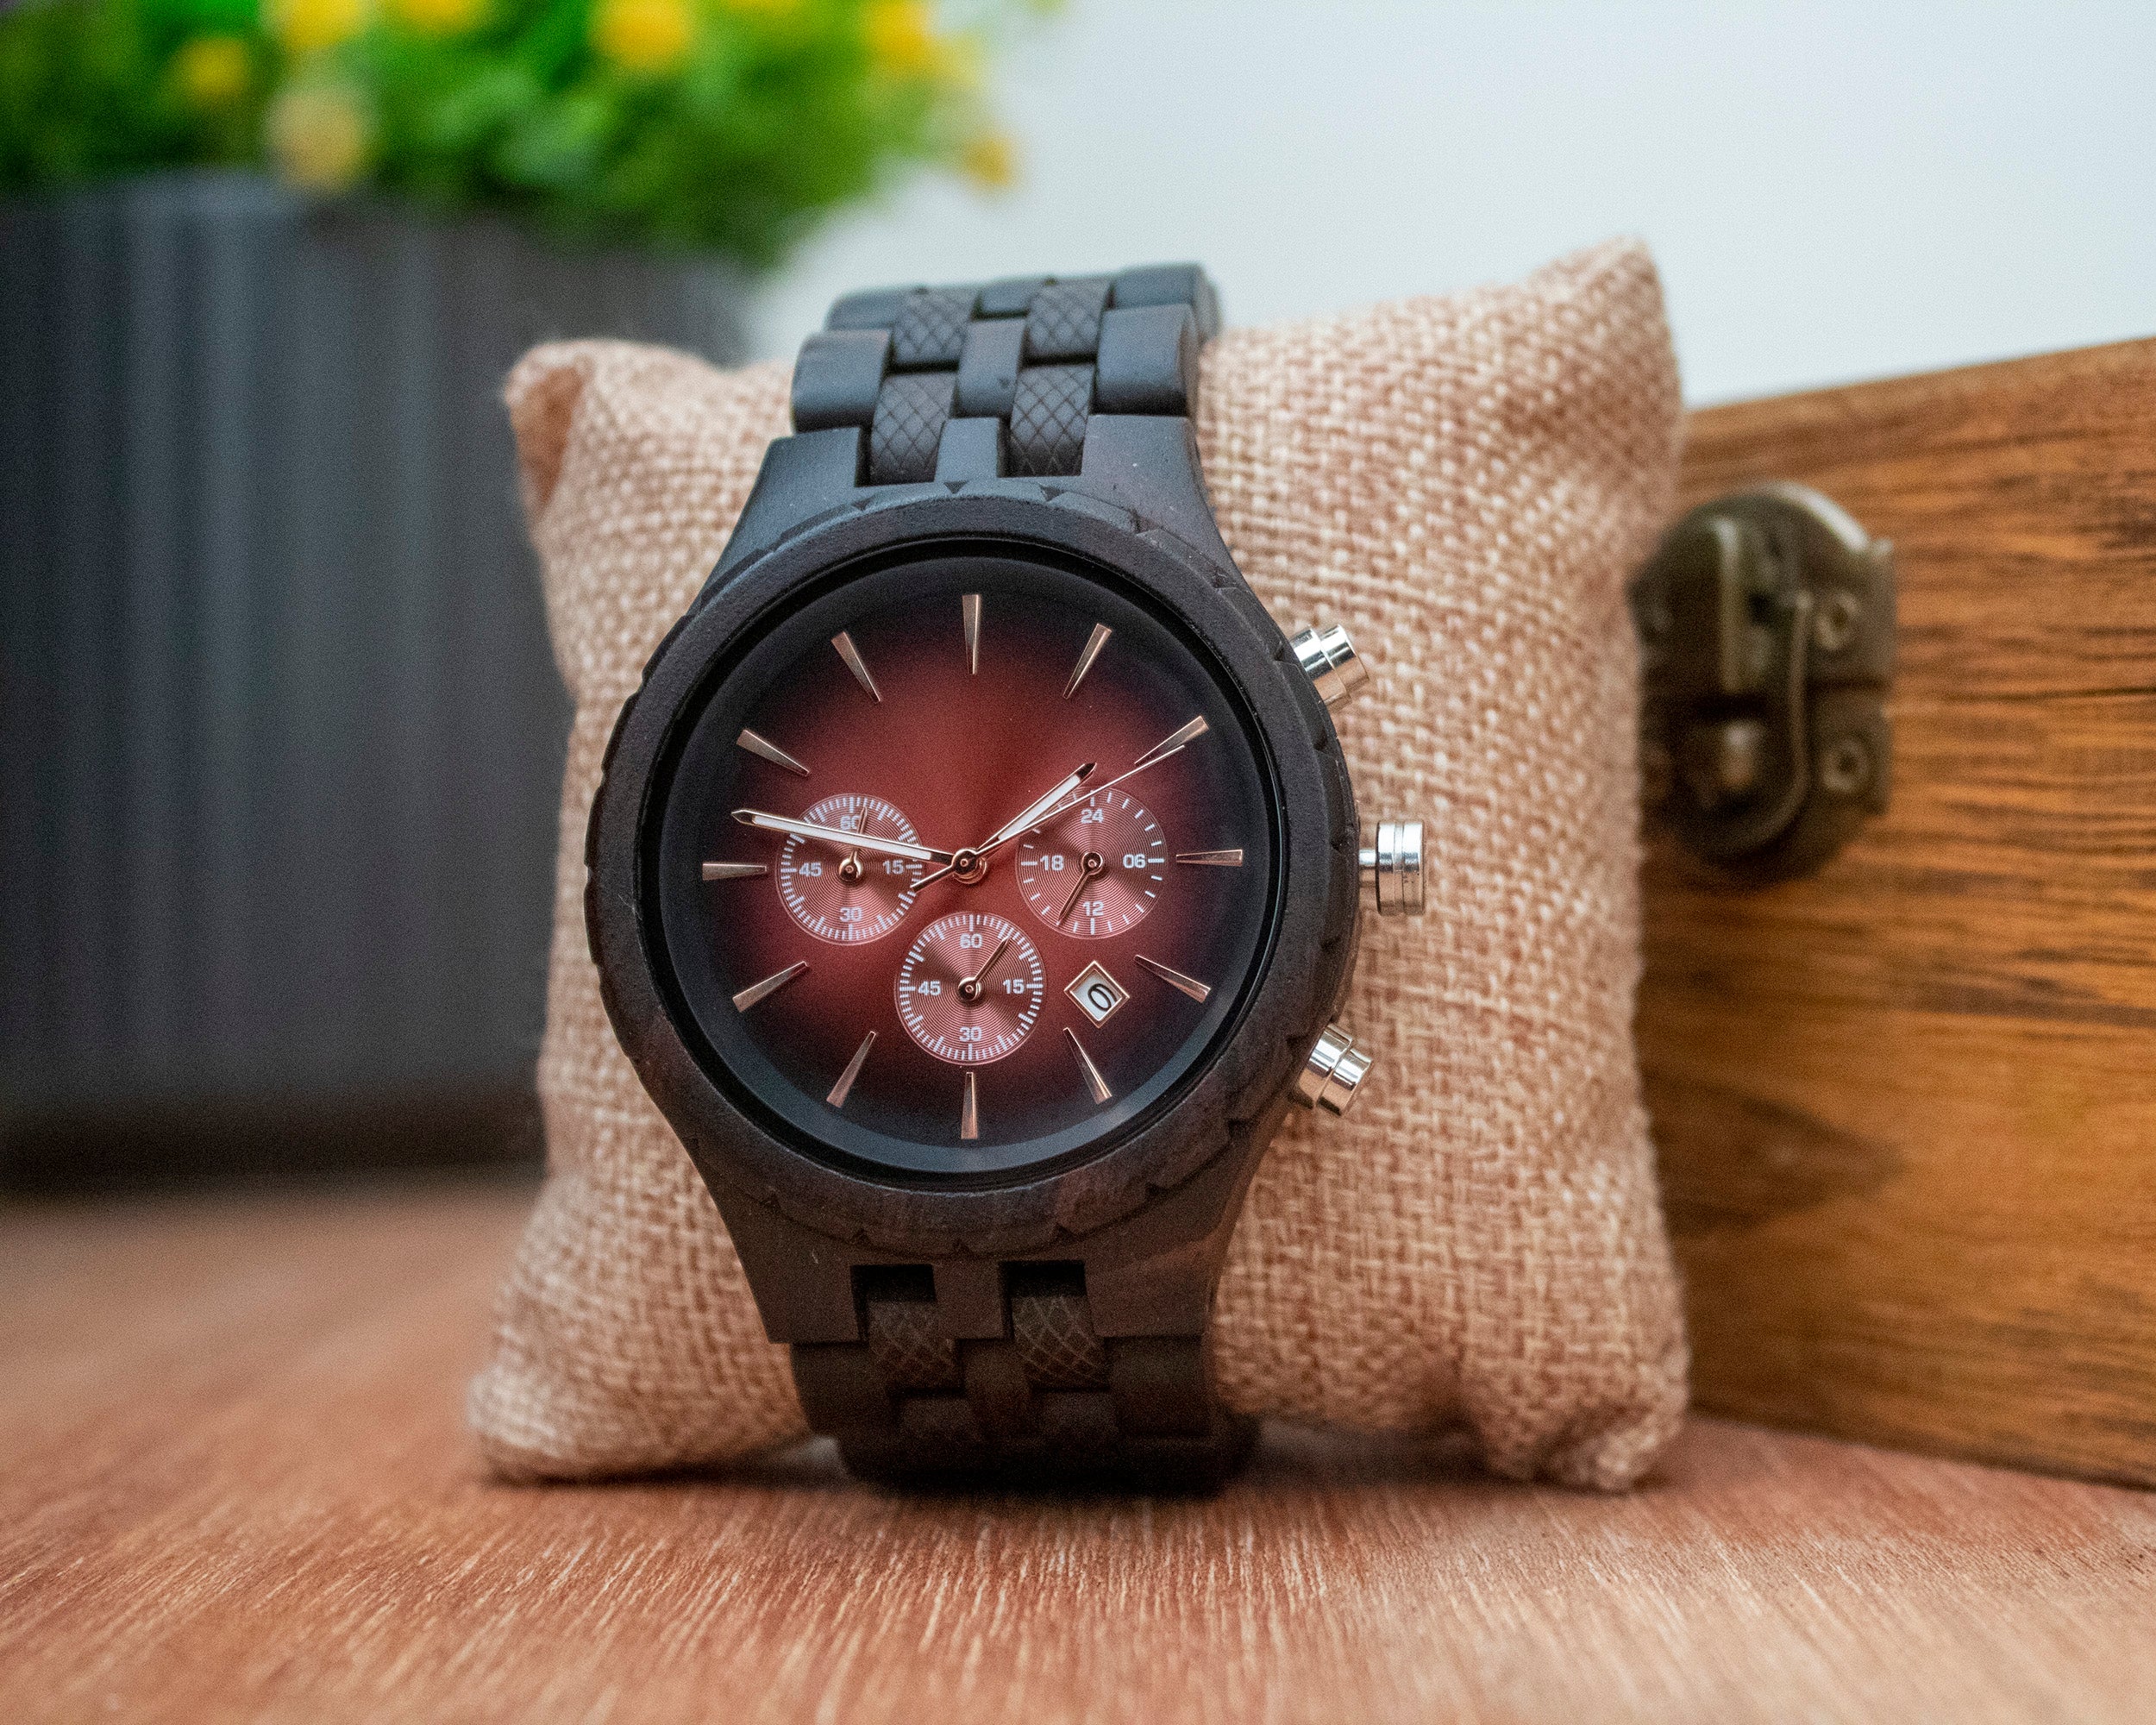 Elevate your style with the Mercury wooden watch - an eco-friendly timepiece made with real wood, featuring a comfortable fit and a brushed silver buckle. The natural wood design adds a unique touch to your everyday wear, and each watch comes in a beautiful box, making it the perfect gift or addition to your collection. Shop now!